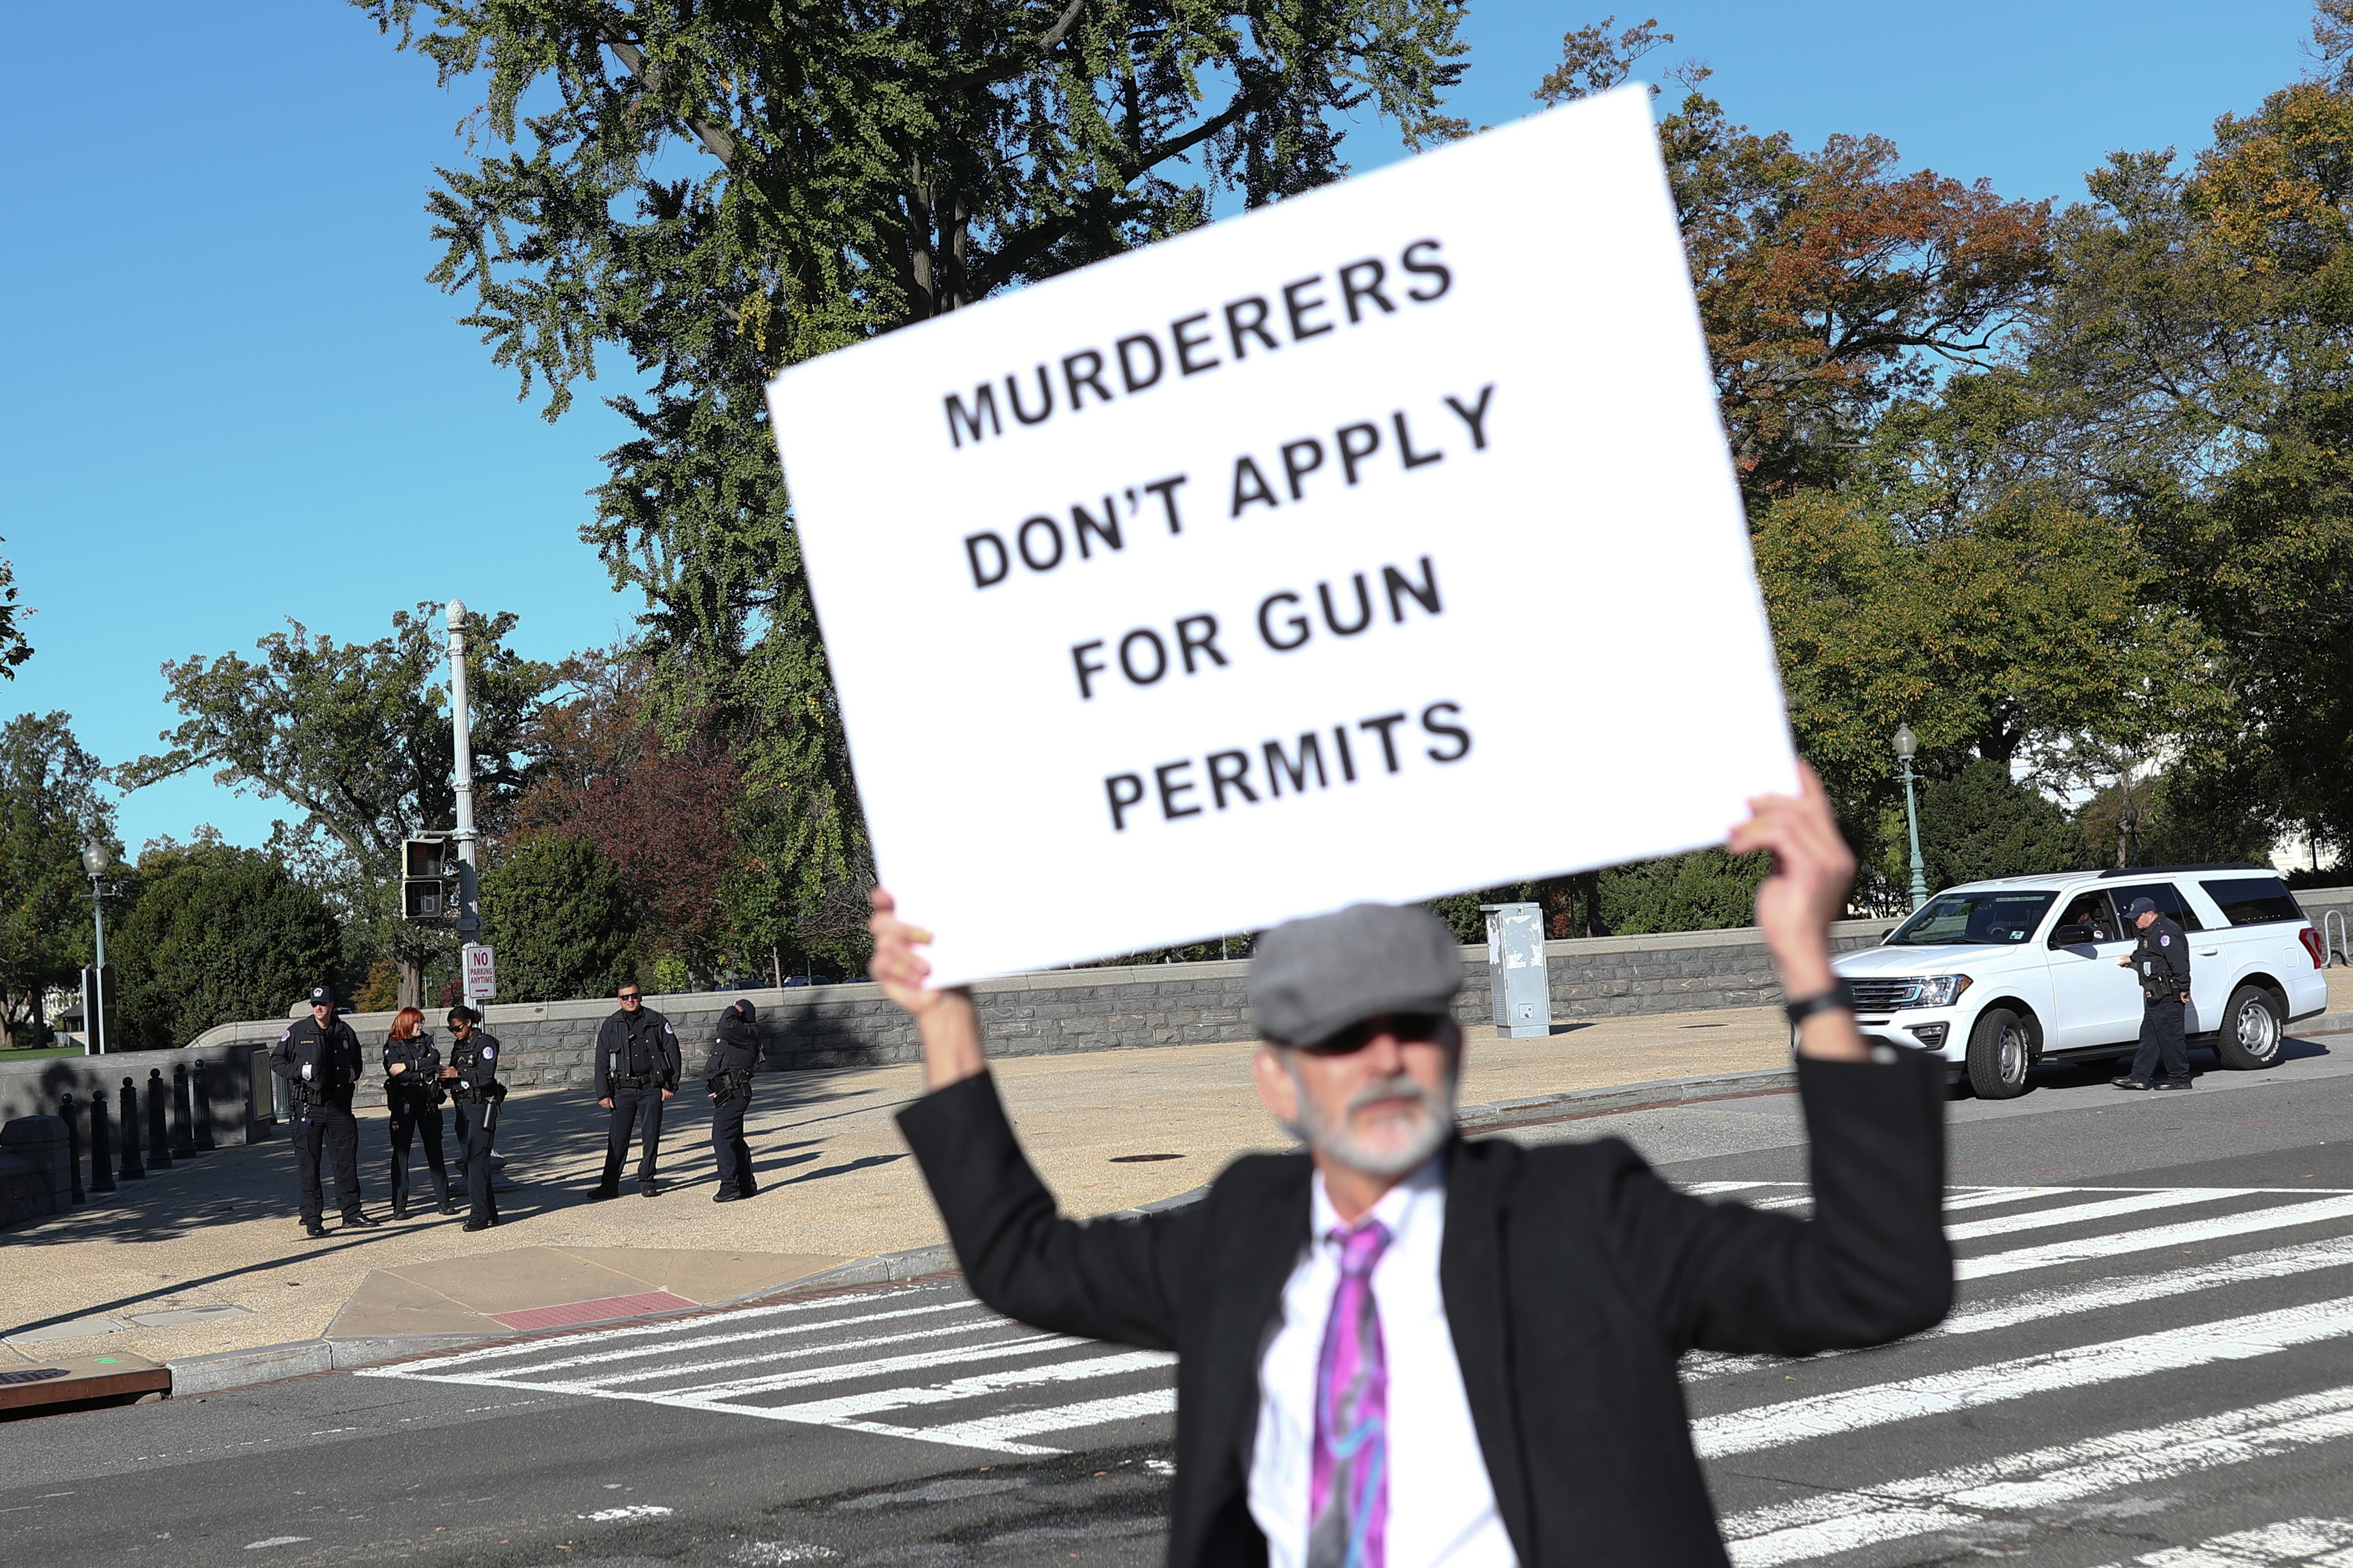 Perry Sharpeless walks along First Street while displaying a sign of protest during a demonstration at the U.S. Supreme Court in Washington, U.S., November 3, 2021. REUTERS/Tom Brenner